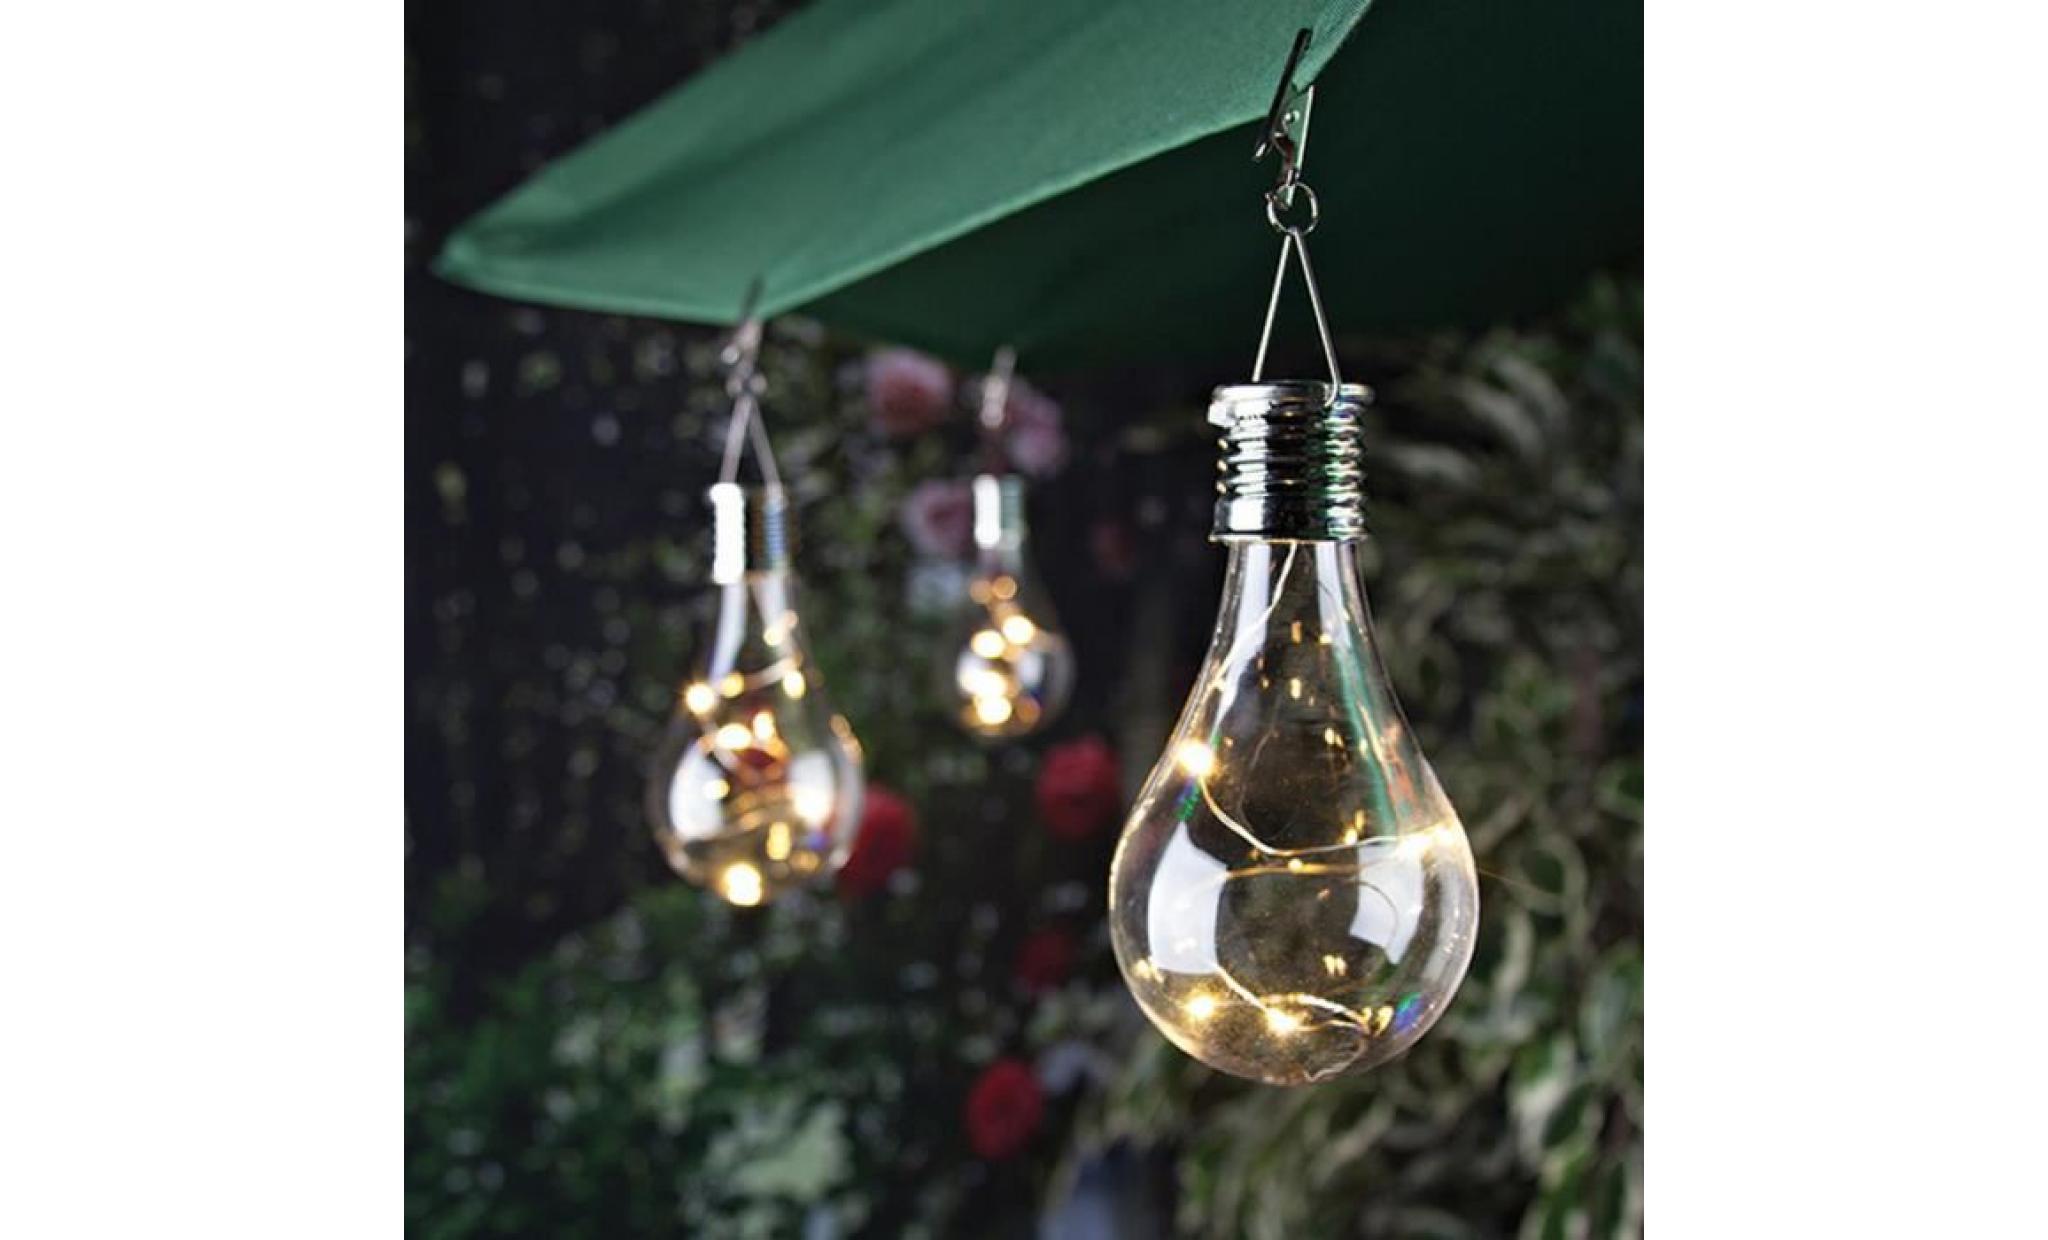 waterproof solar rotatable outdoor garden camping hanging led light lamp bulb sl pageare1674 pageare1674 pas cher